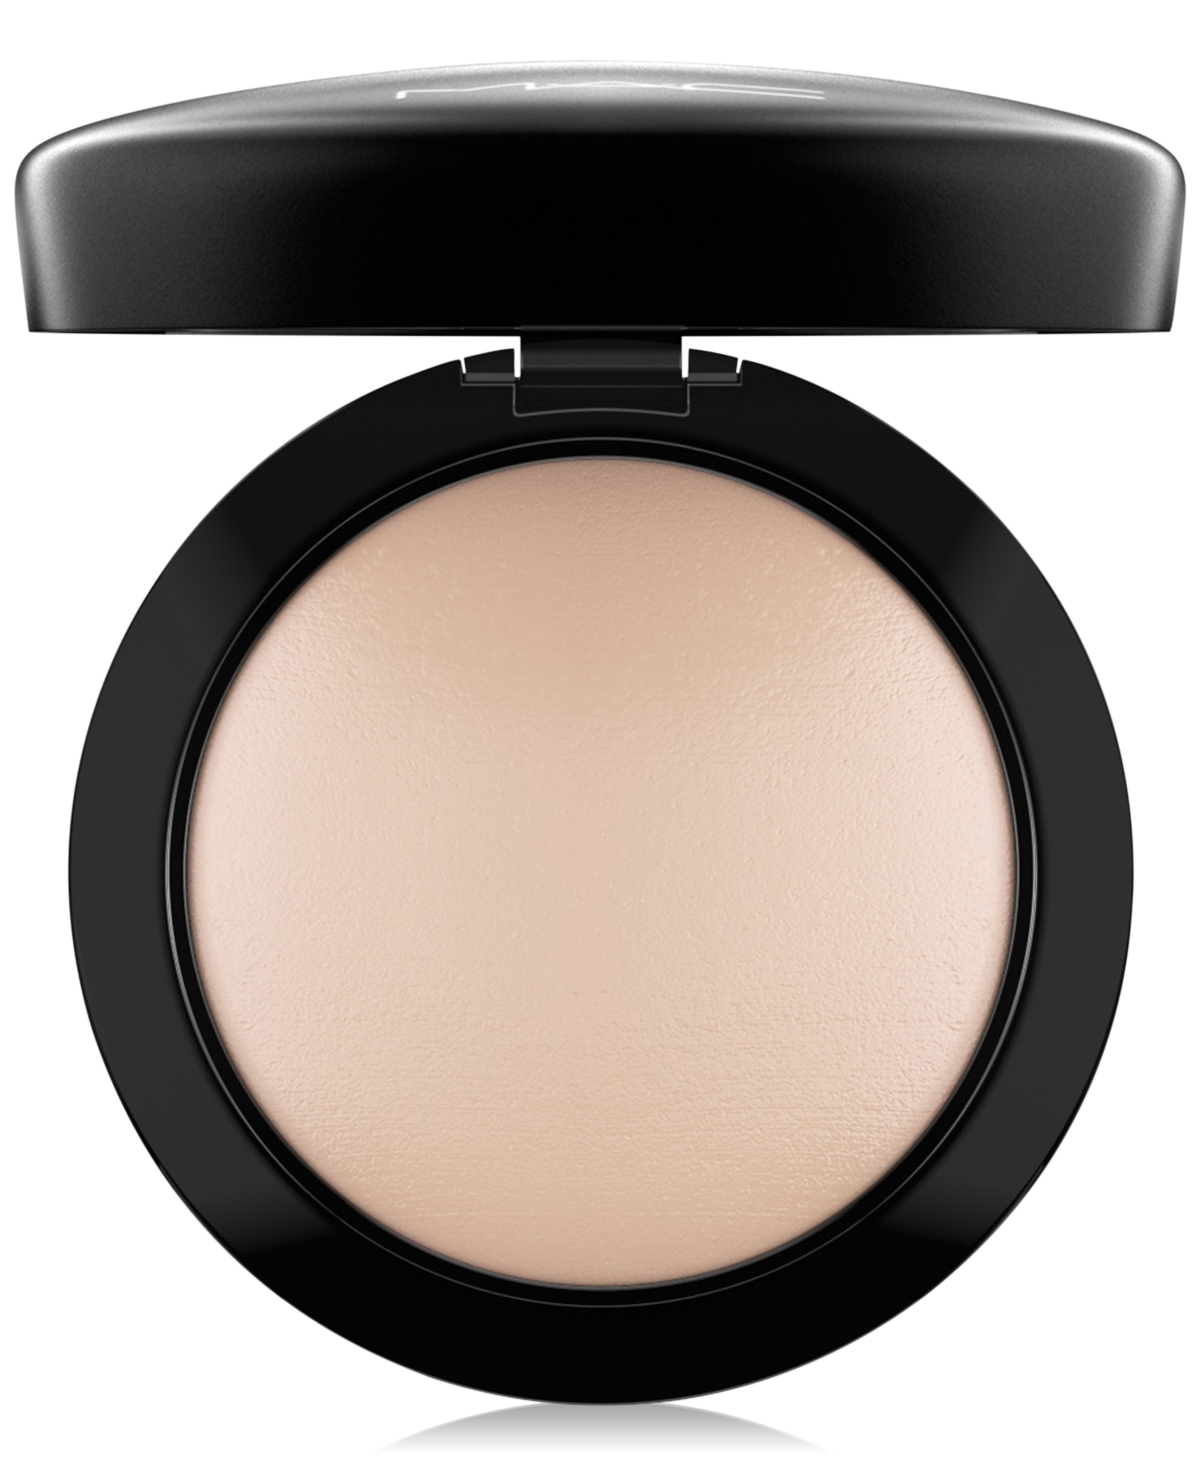 Mac Mineralize Skinfinish Natural In Light